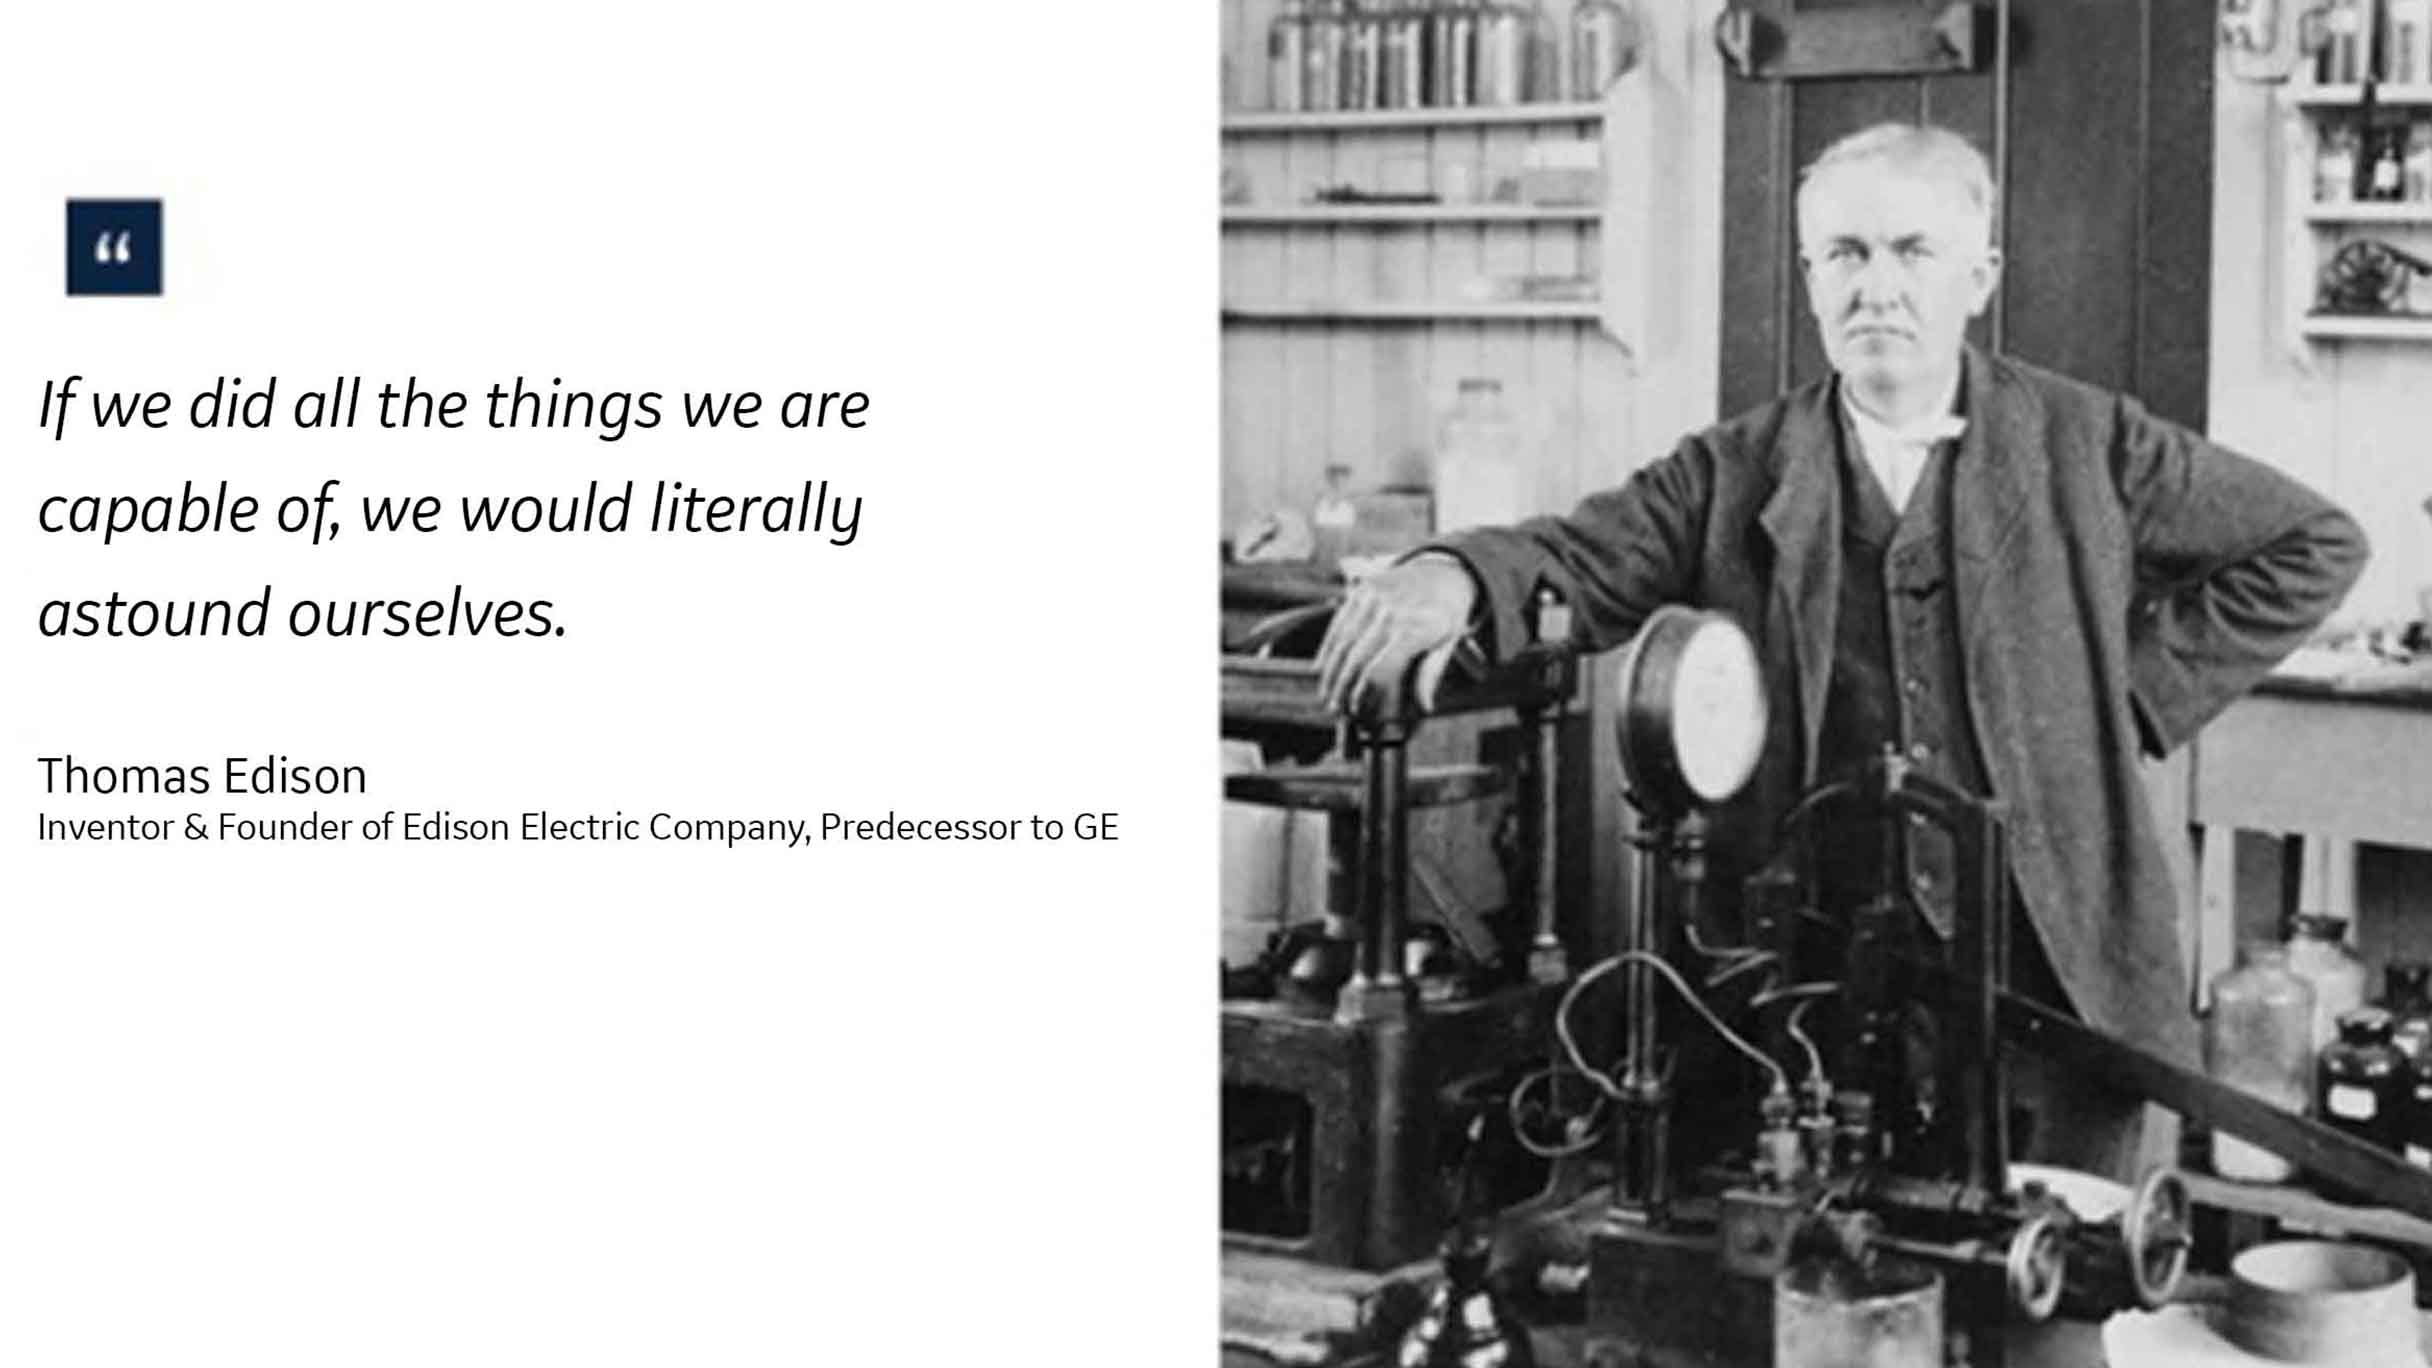 Thomas Edison, founder for General Electric